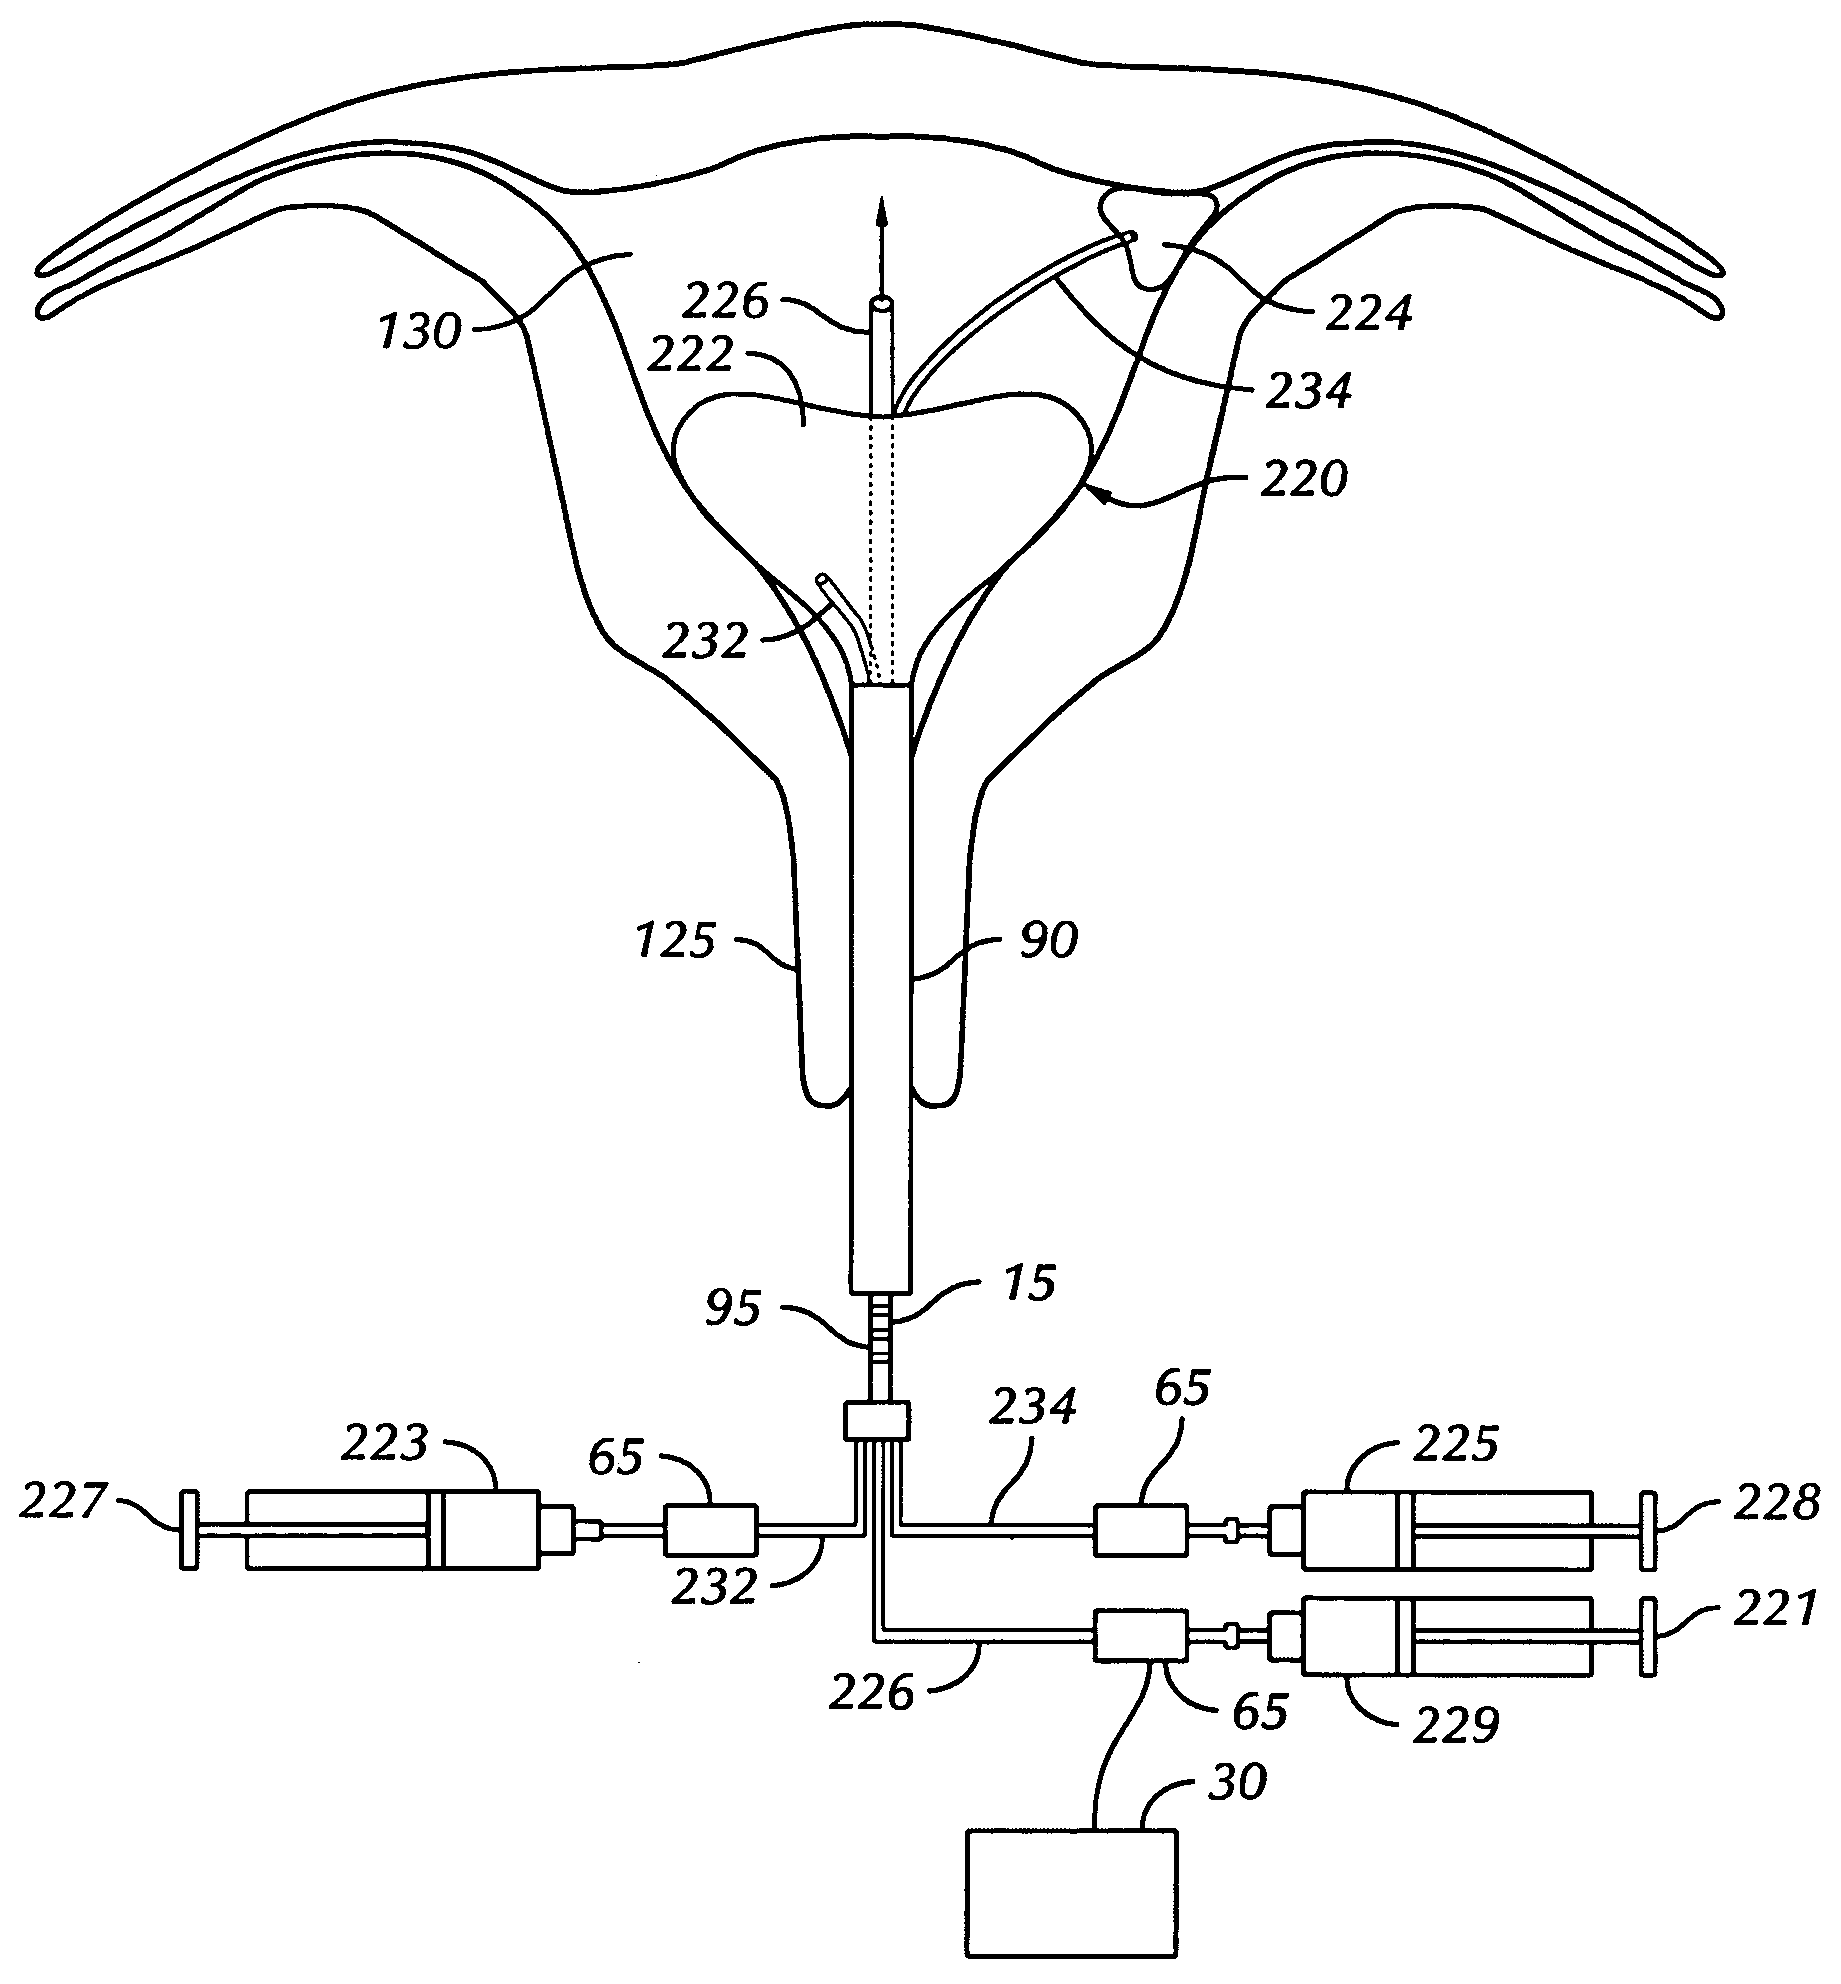 Apparatus and method for selectably treating a fallopian tube